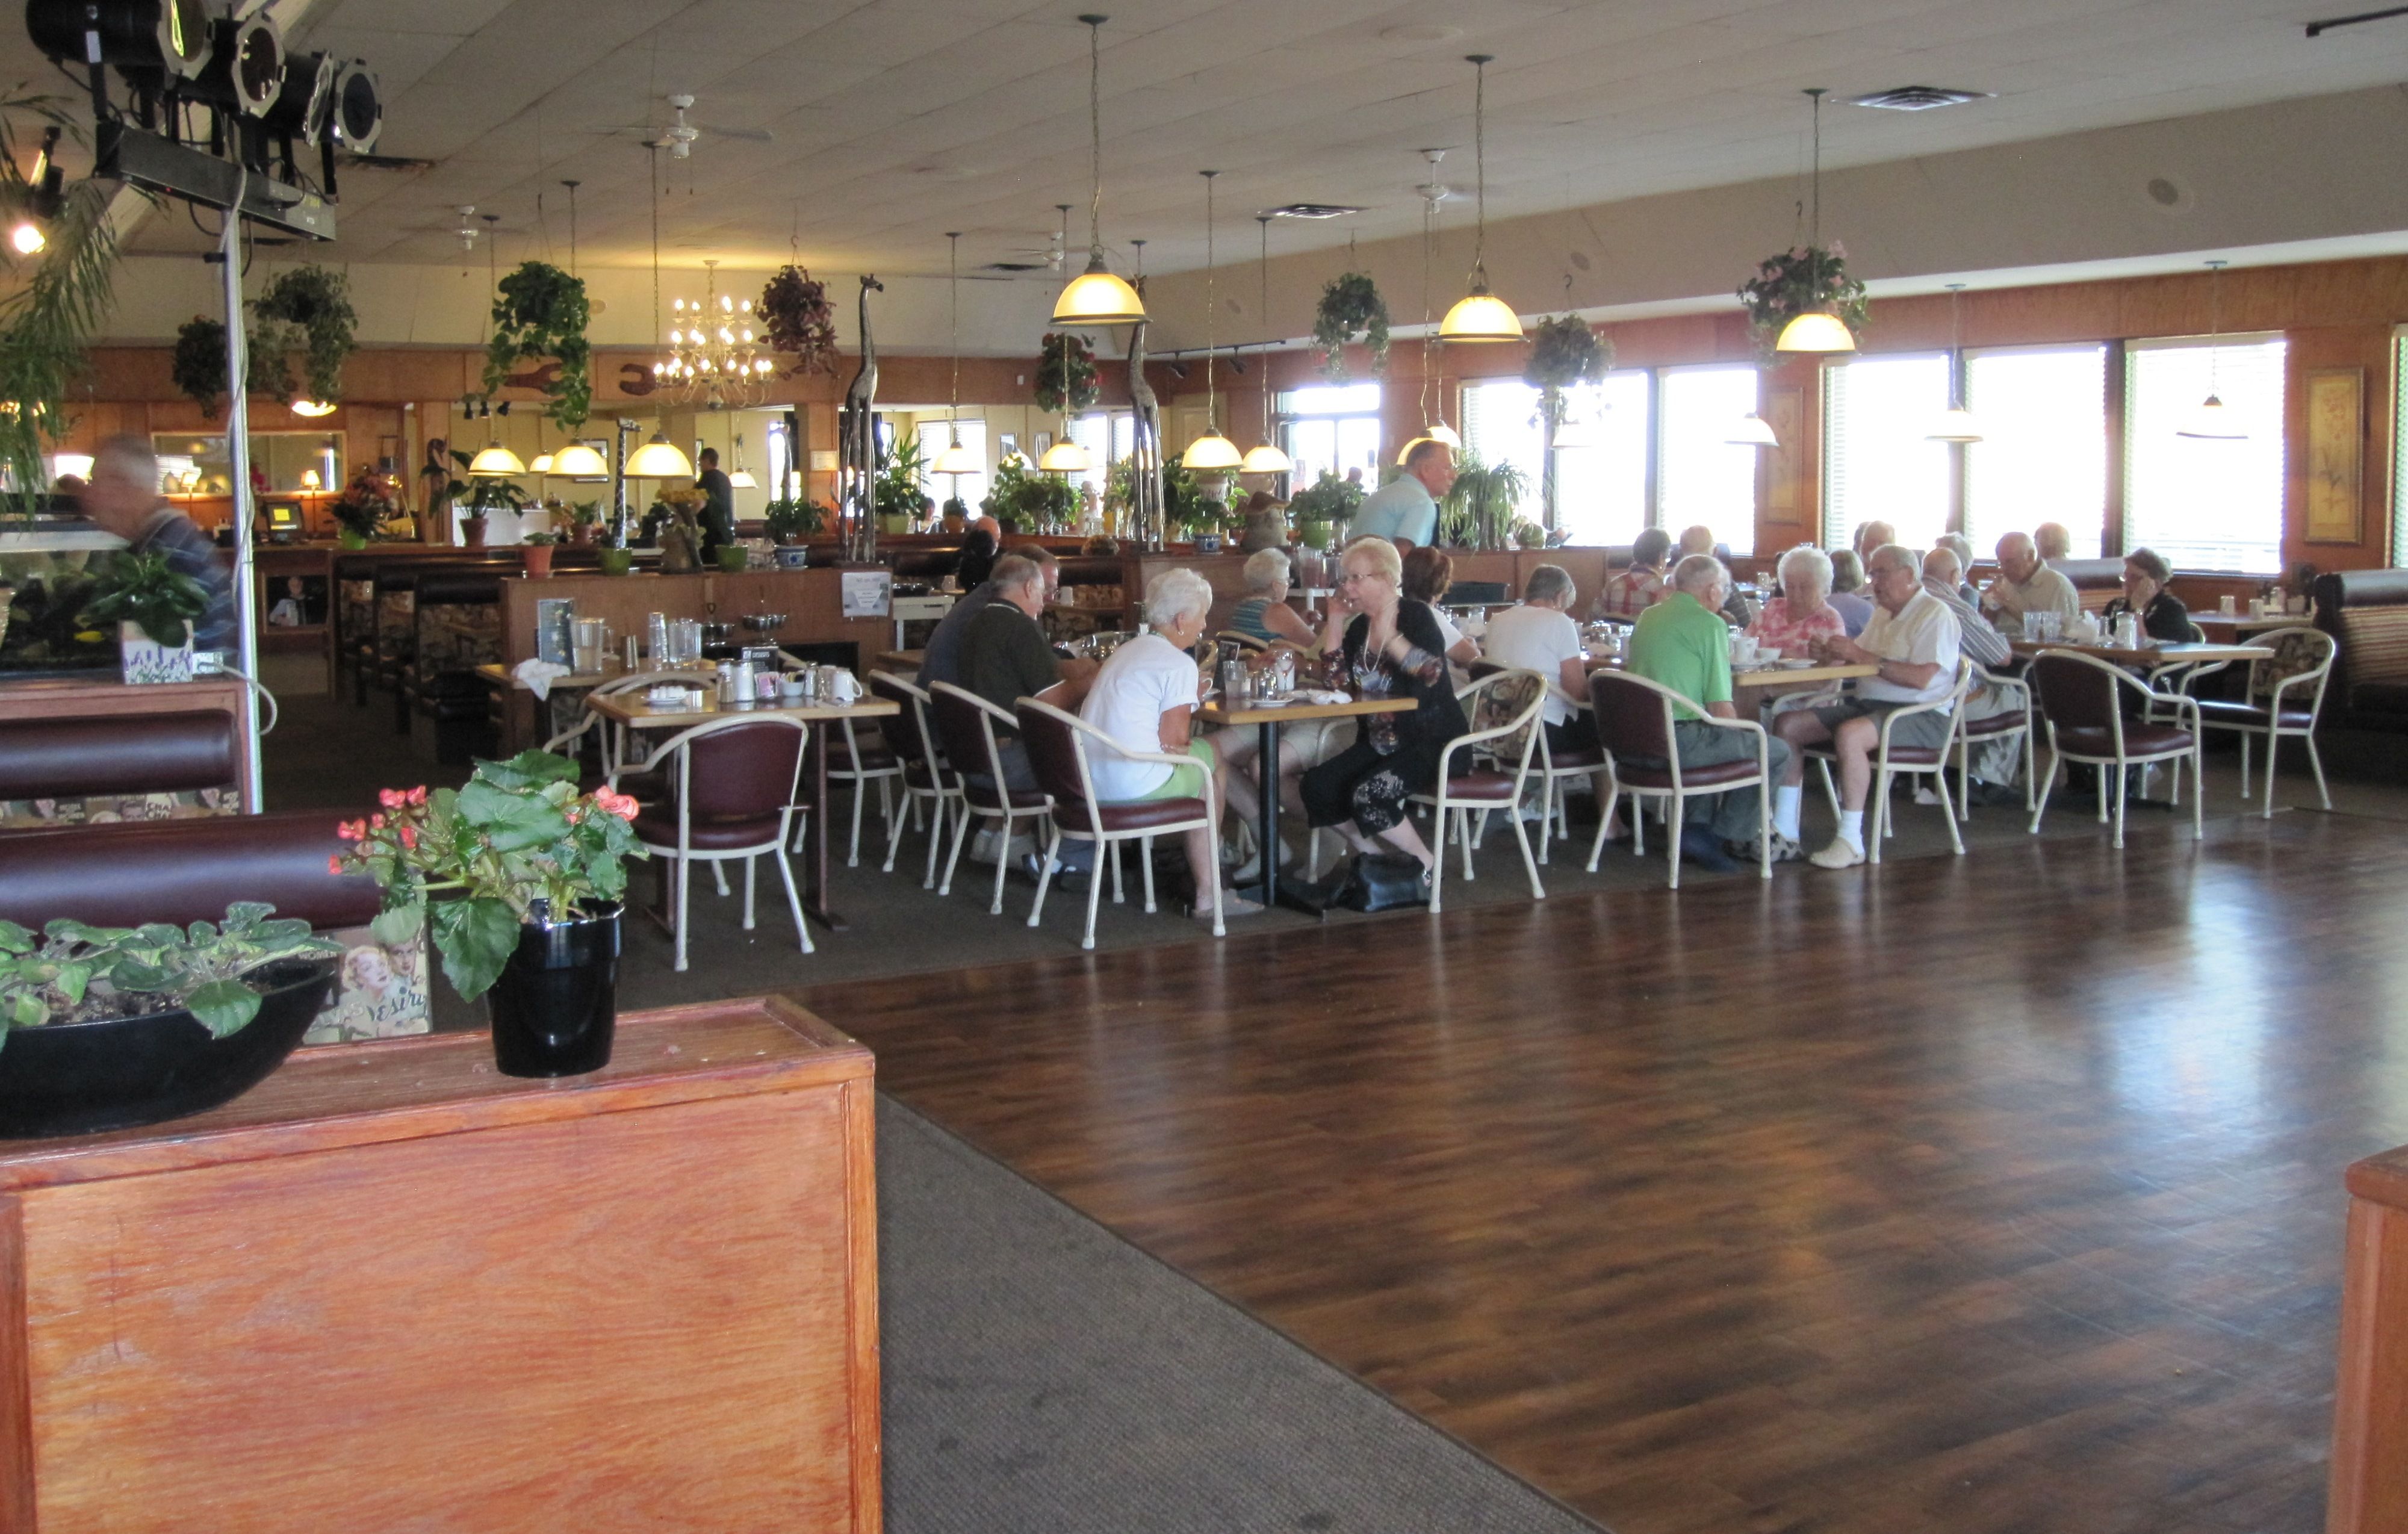 An image showing the inside of the MGM Restaurant in Nanaimo